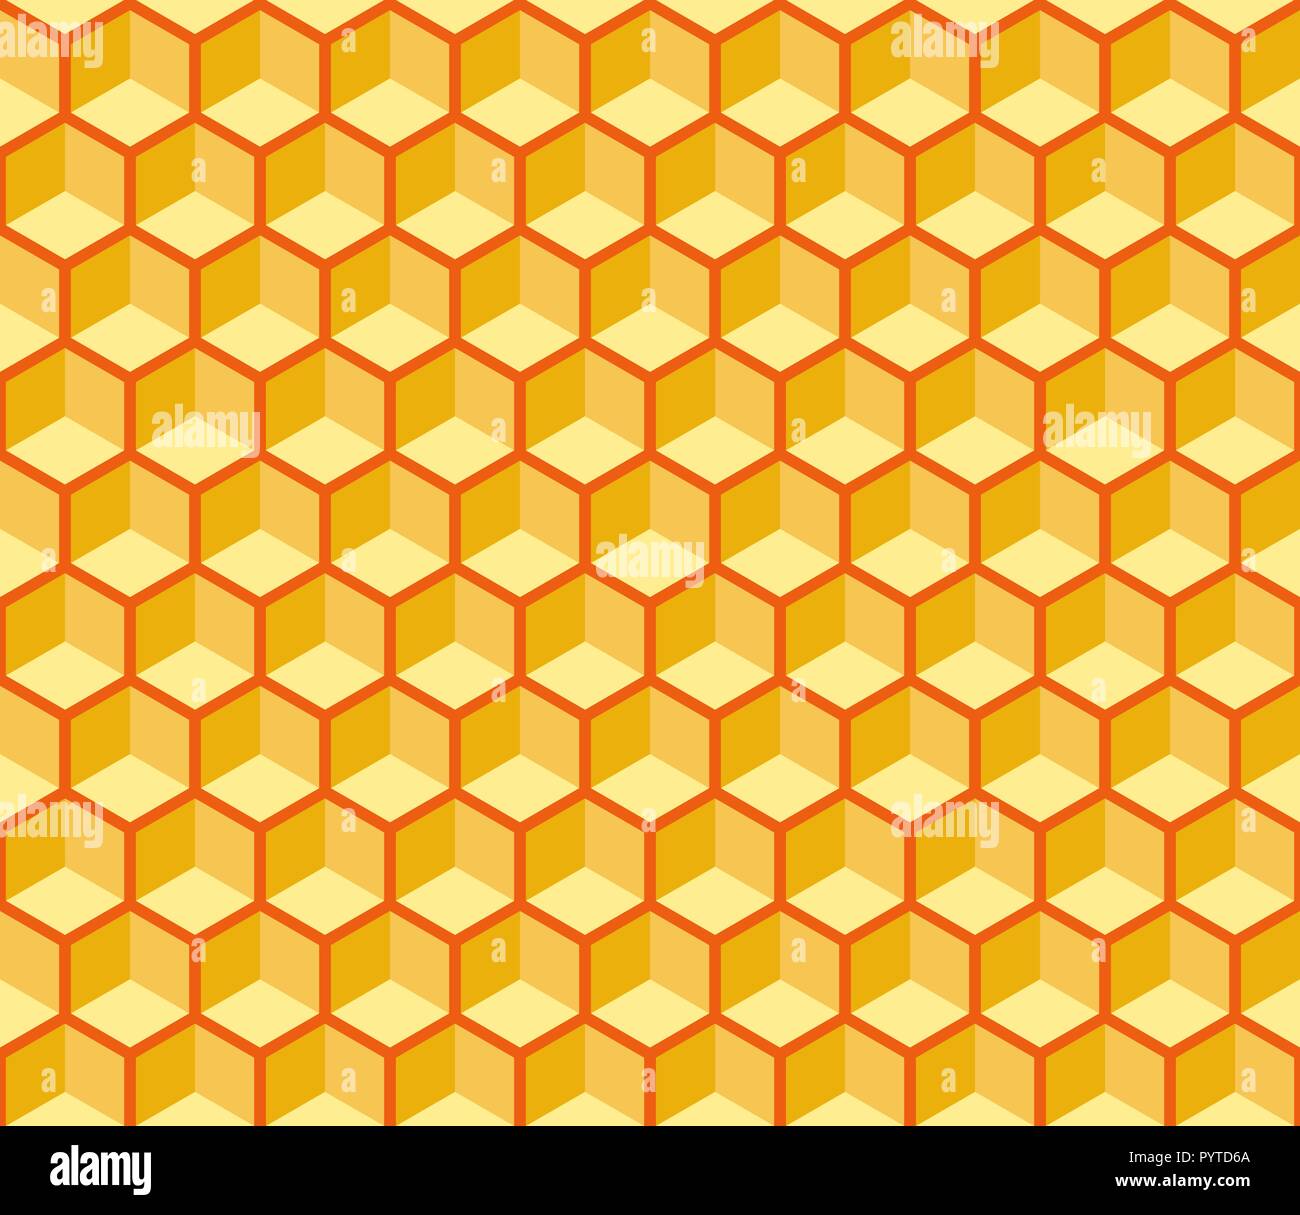 Seamless hexagonal cells vector texture. Editable, reddish background, you can change the background or cells color on any other Stock Vector